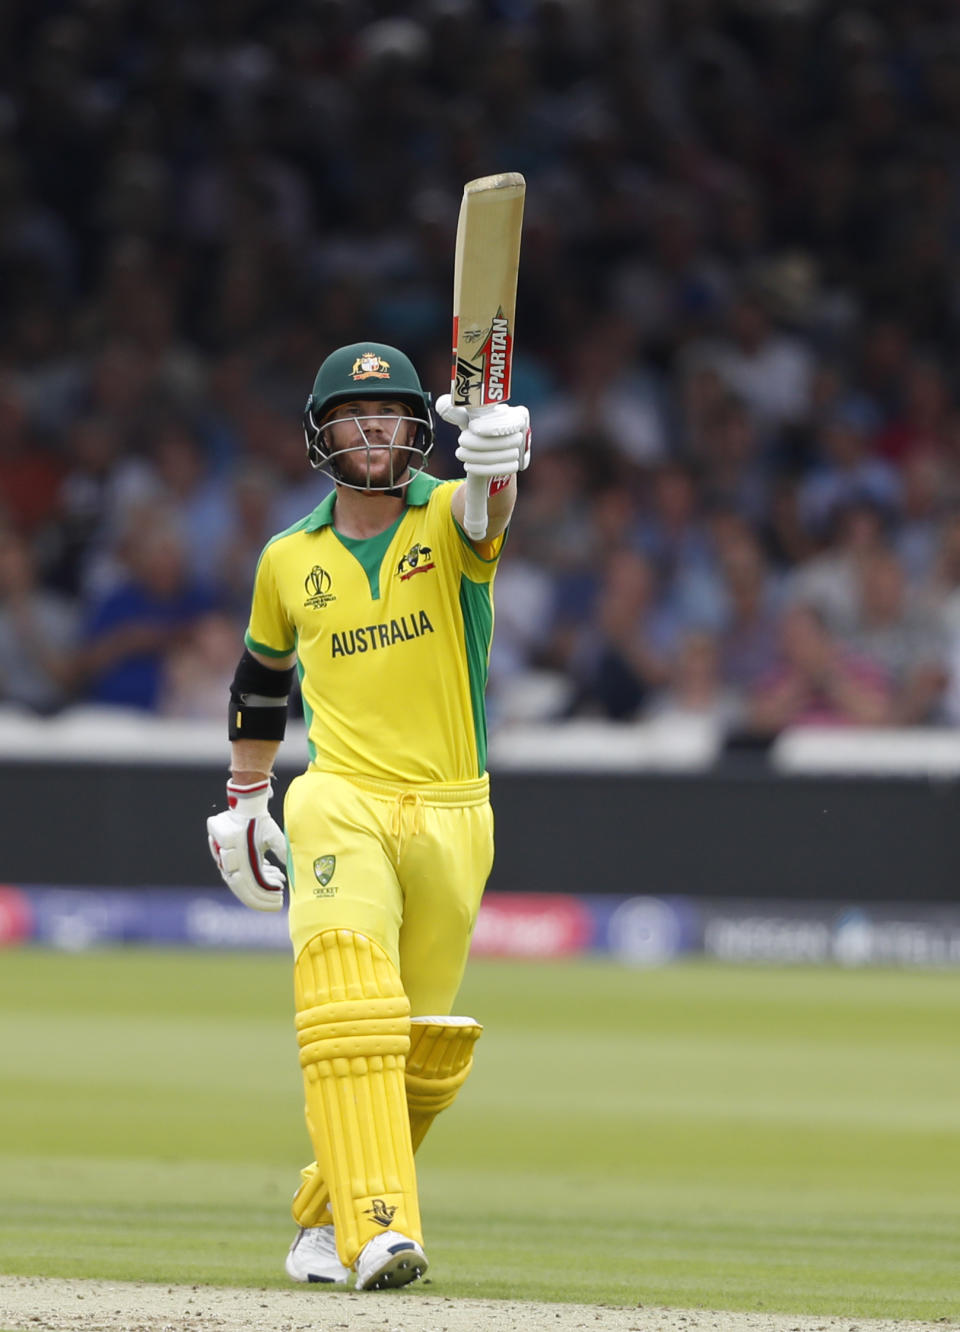 Australia's David Warner celebrates after getting 50 runs not out during their Cricket World Cup match between England and Australia at Lord's cricket ground in London, Tuesday, June 25, 2019. (AP Photo/Alastair Grant)